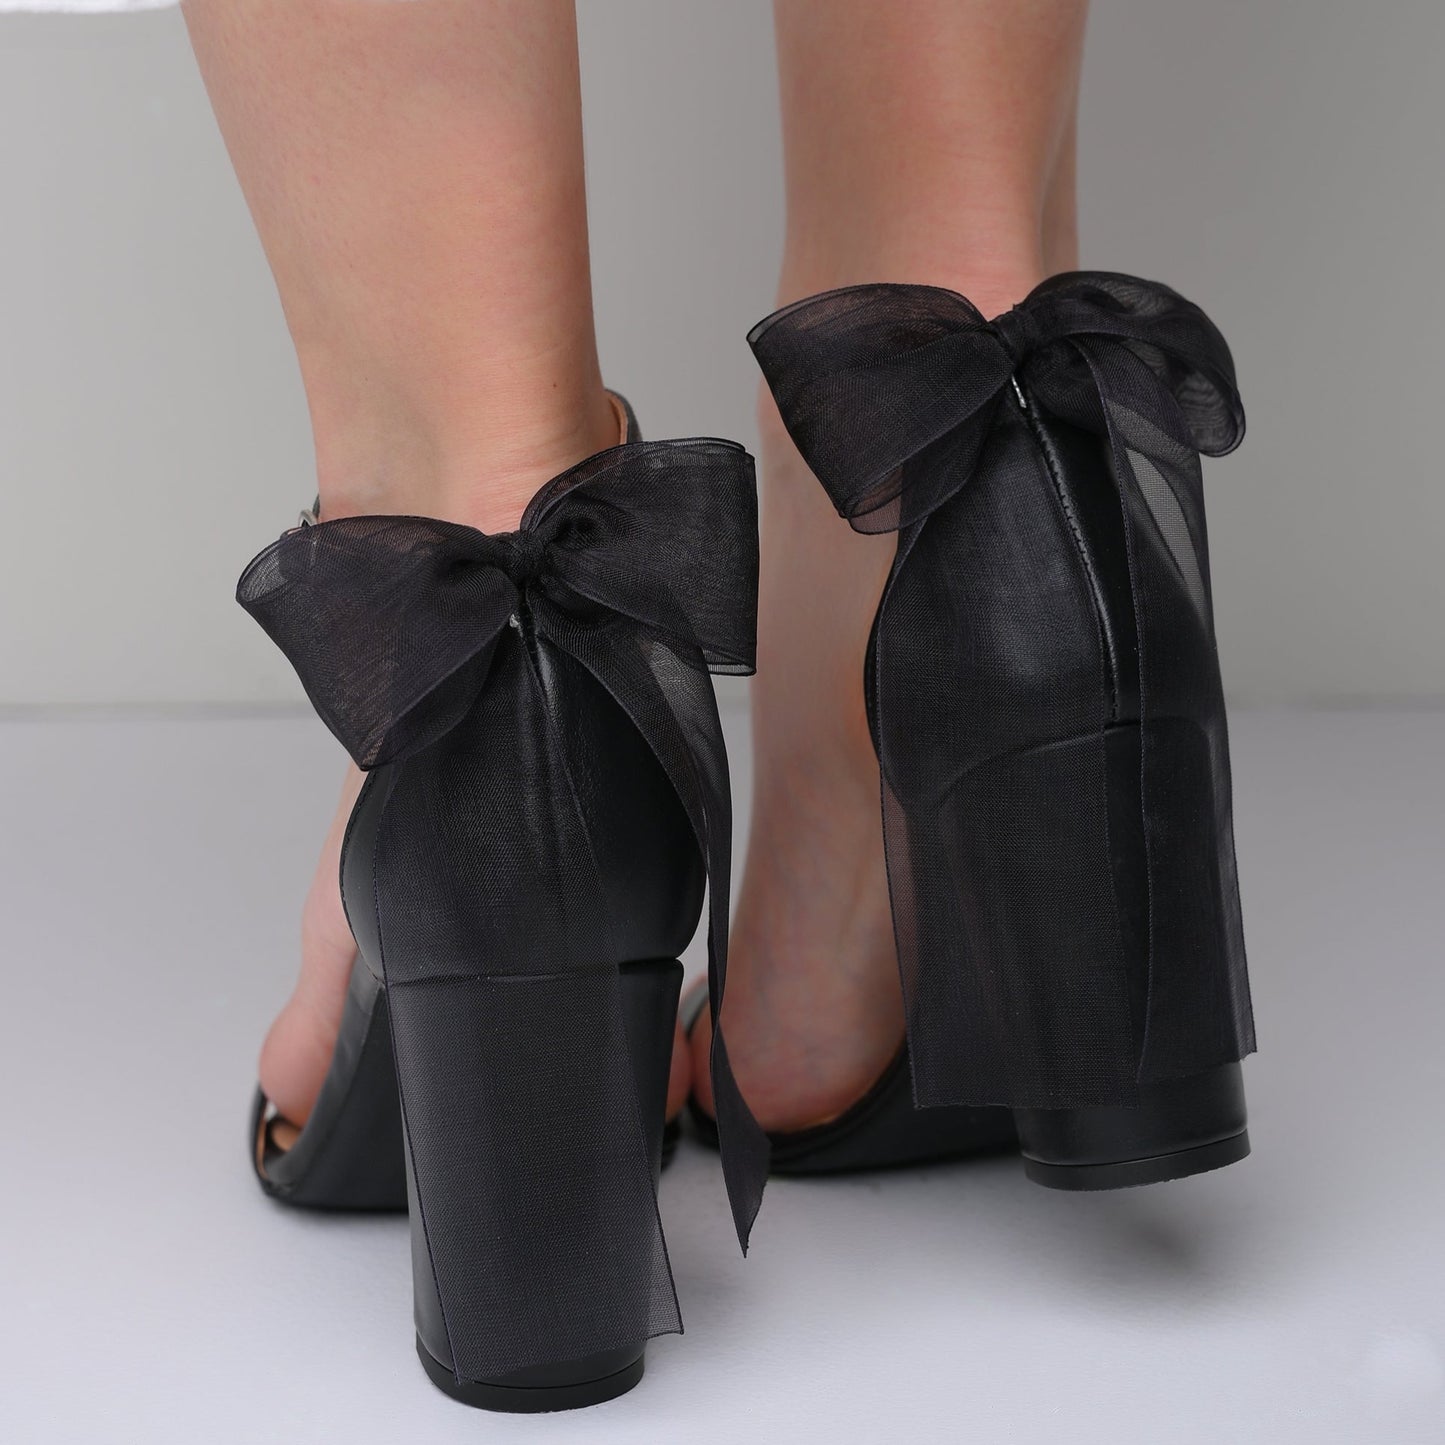 size 12 women shoes, black heels with a bow on the front